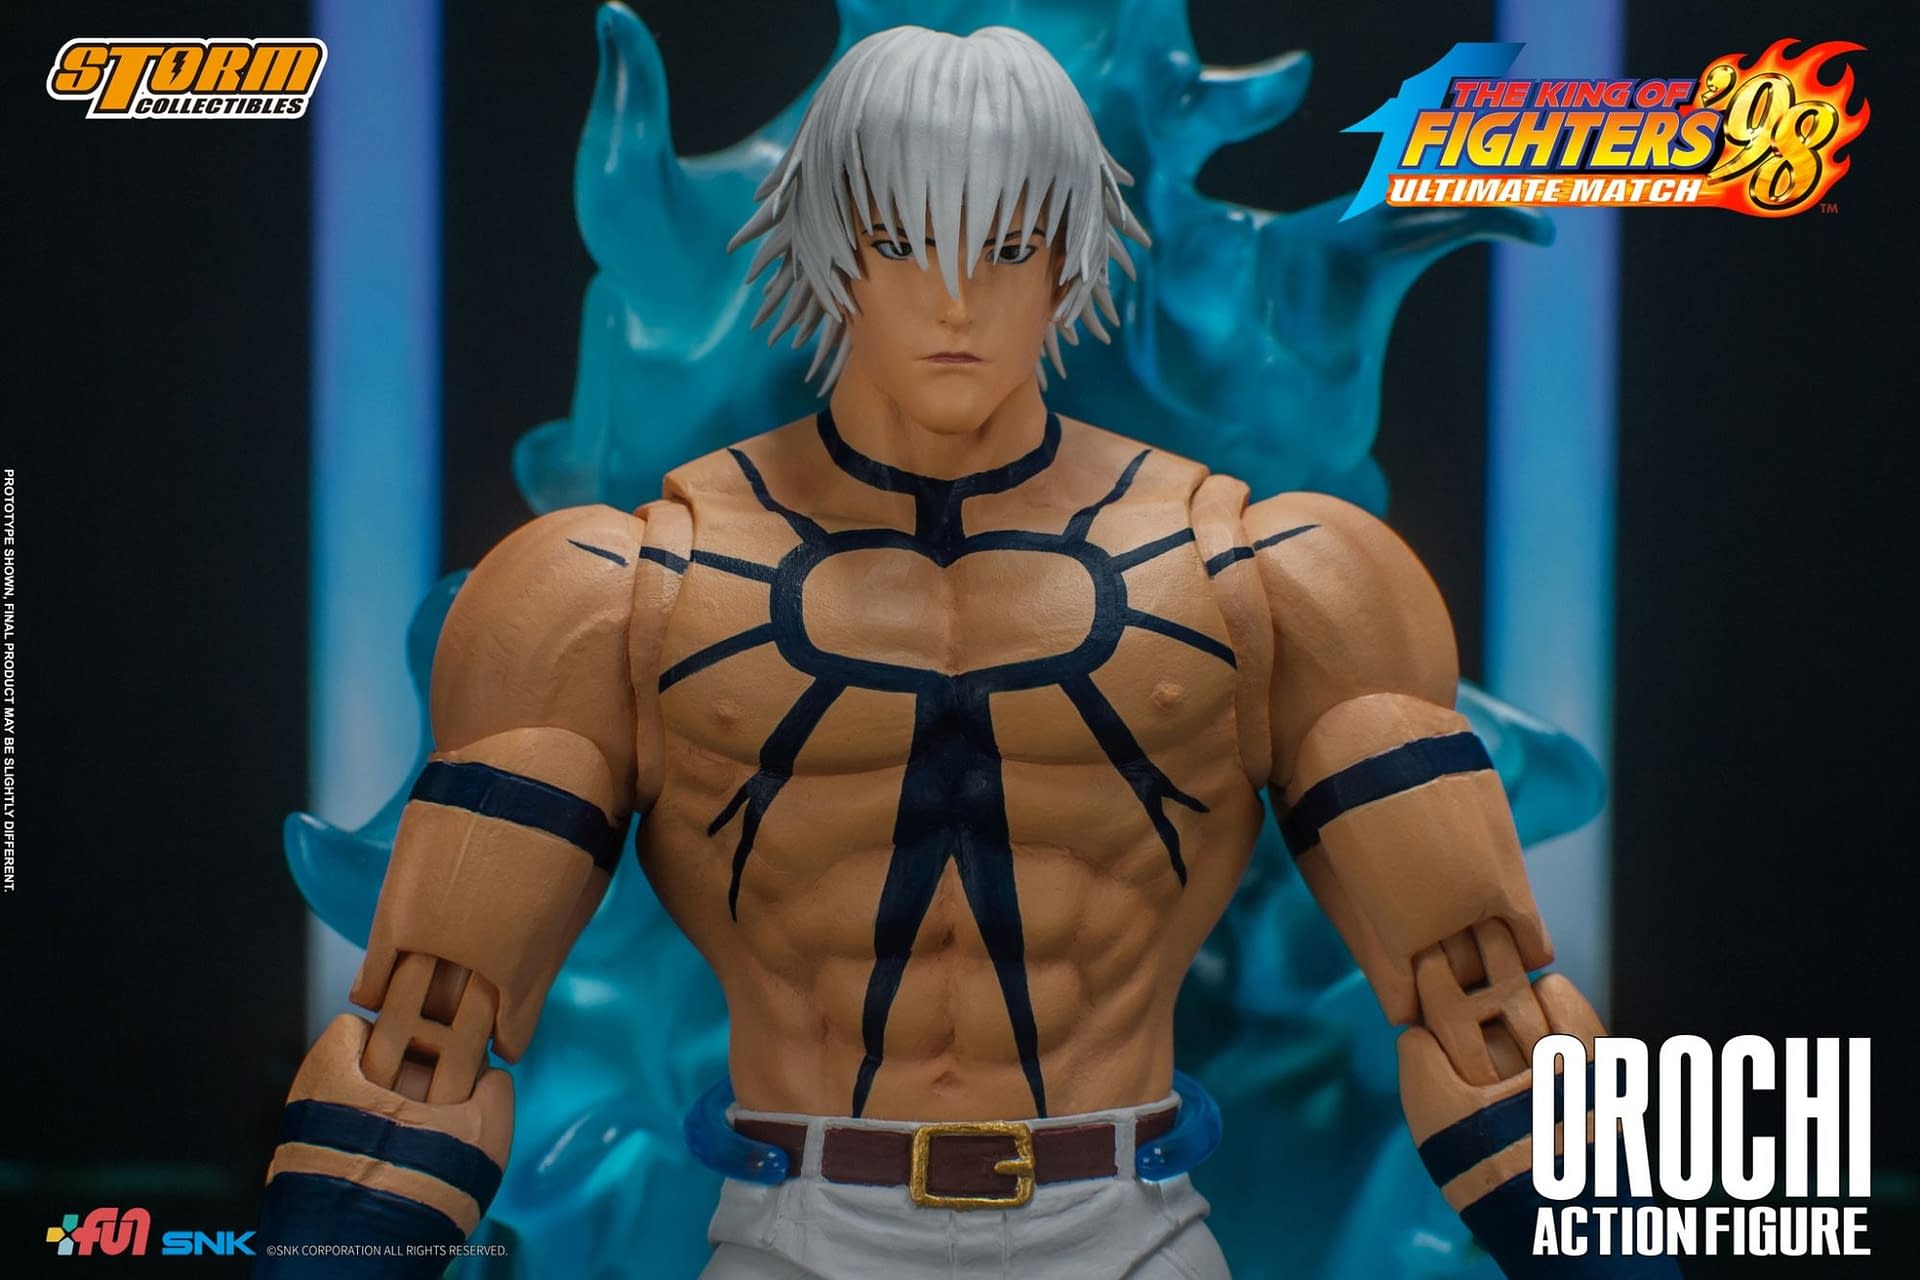 King of Fighters 98 Ultimate Match Orochi Arrives from Storm Collectibles